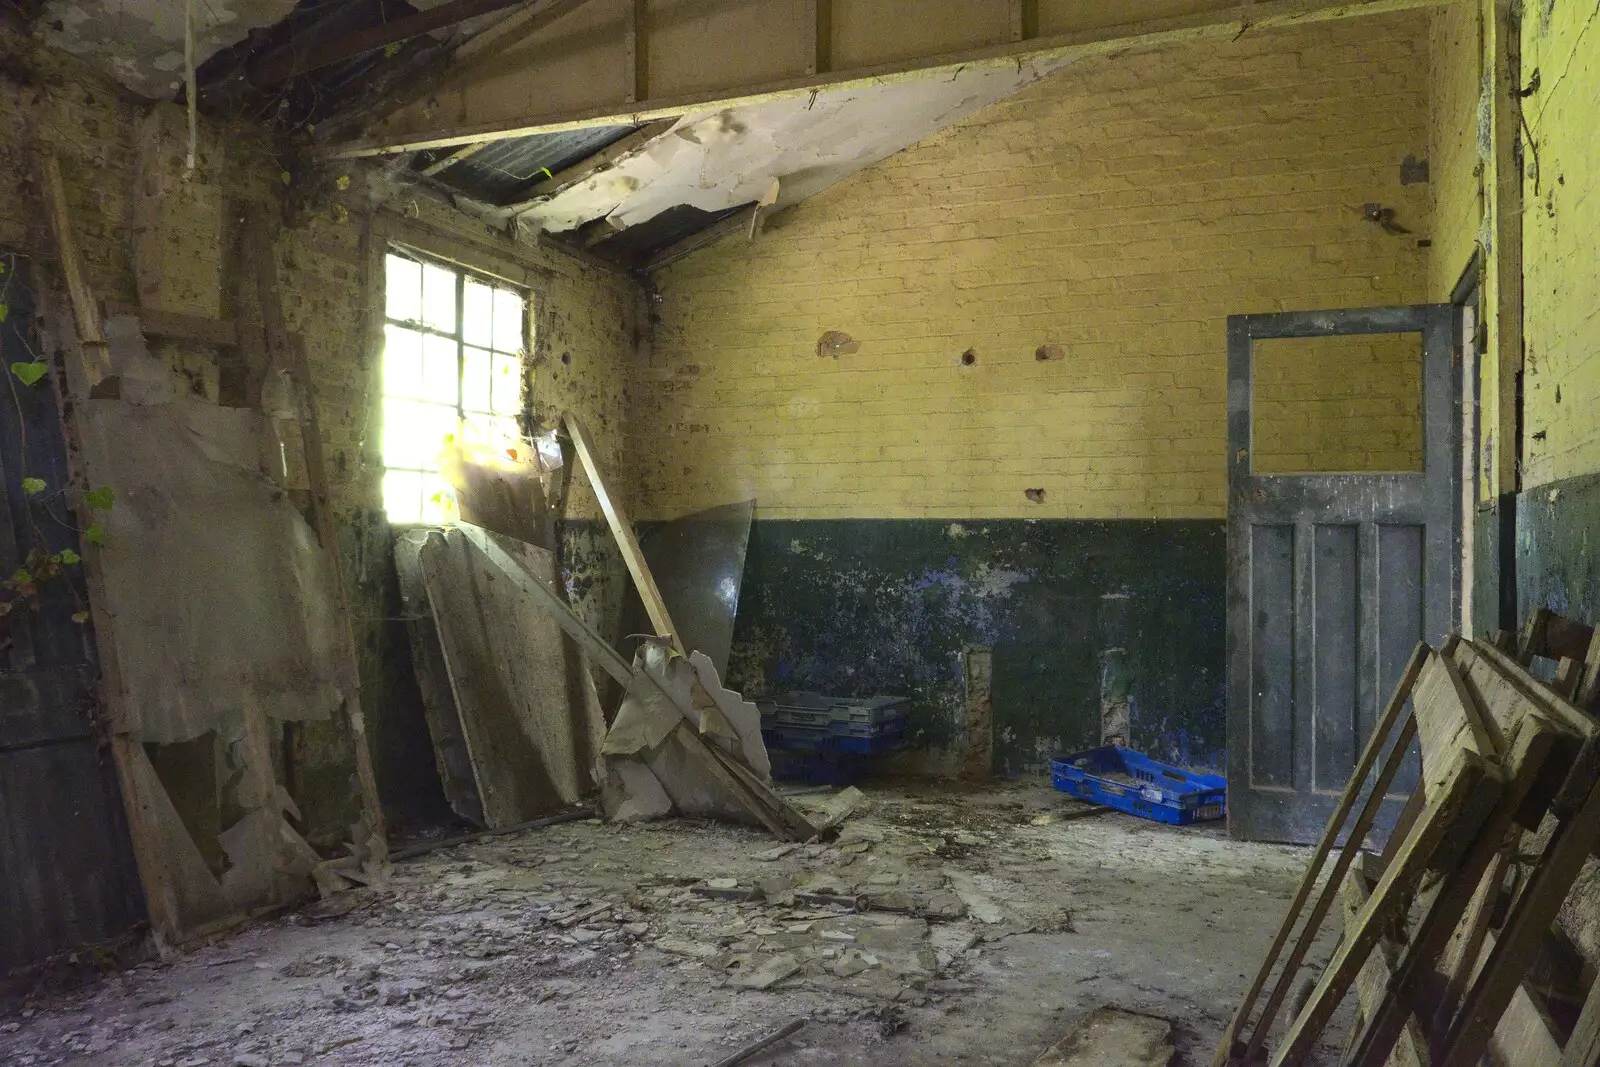 Another derelict room, from A 1940s Timewarp, Site 4, Bungay Airfield, Flixton, Suffolk - 9th June 2022